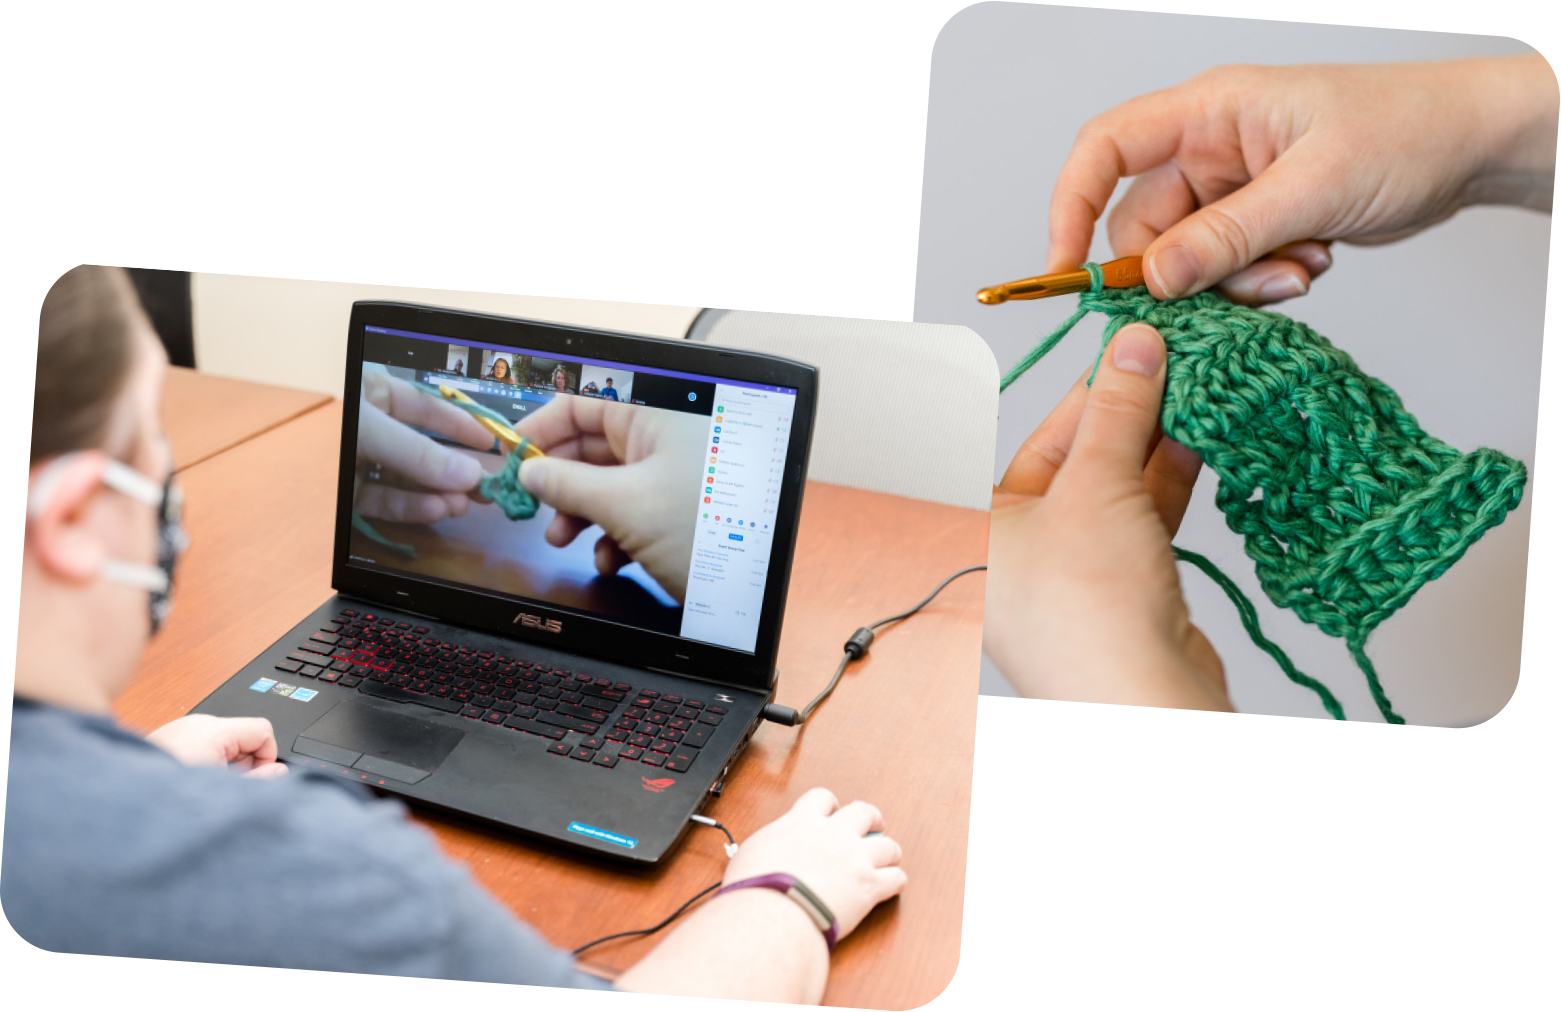 Two photos of person watching a knitting how-to video and hands knitting